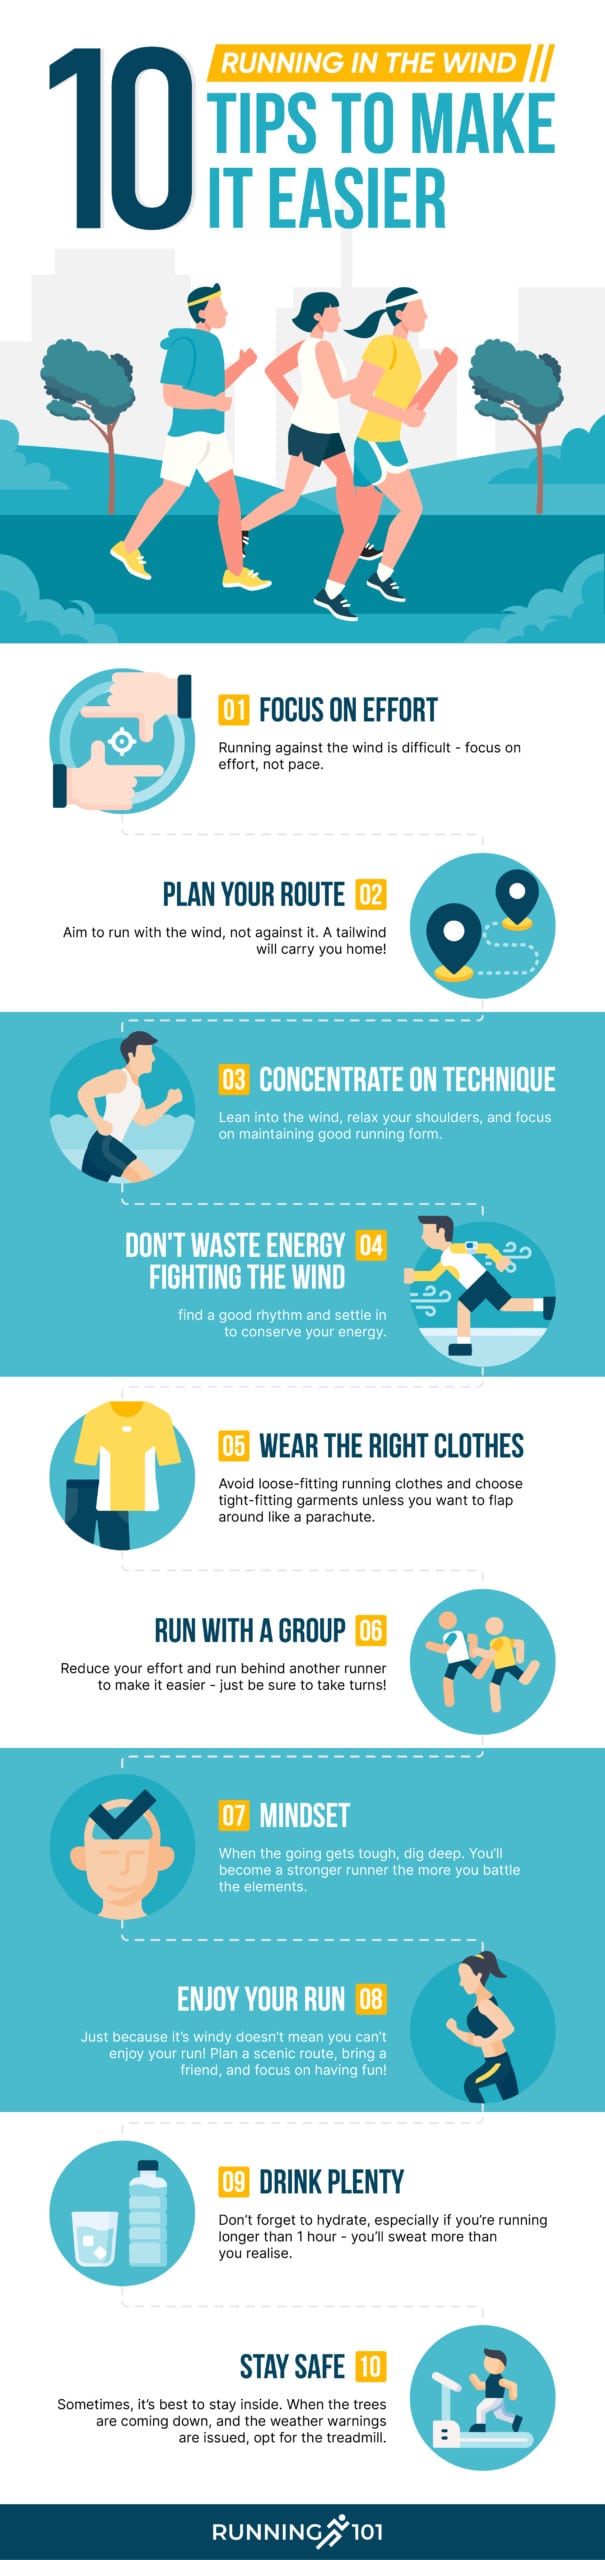 tips for running in the wind infographic